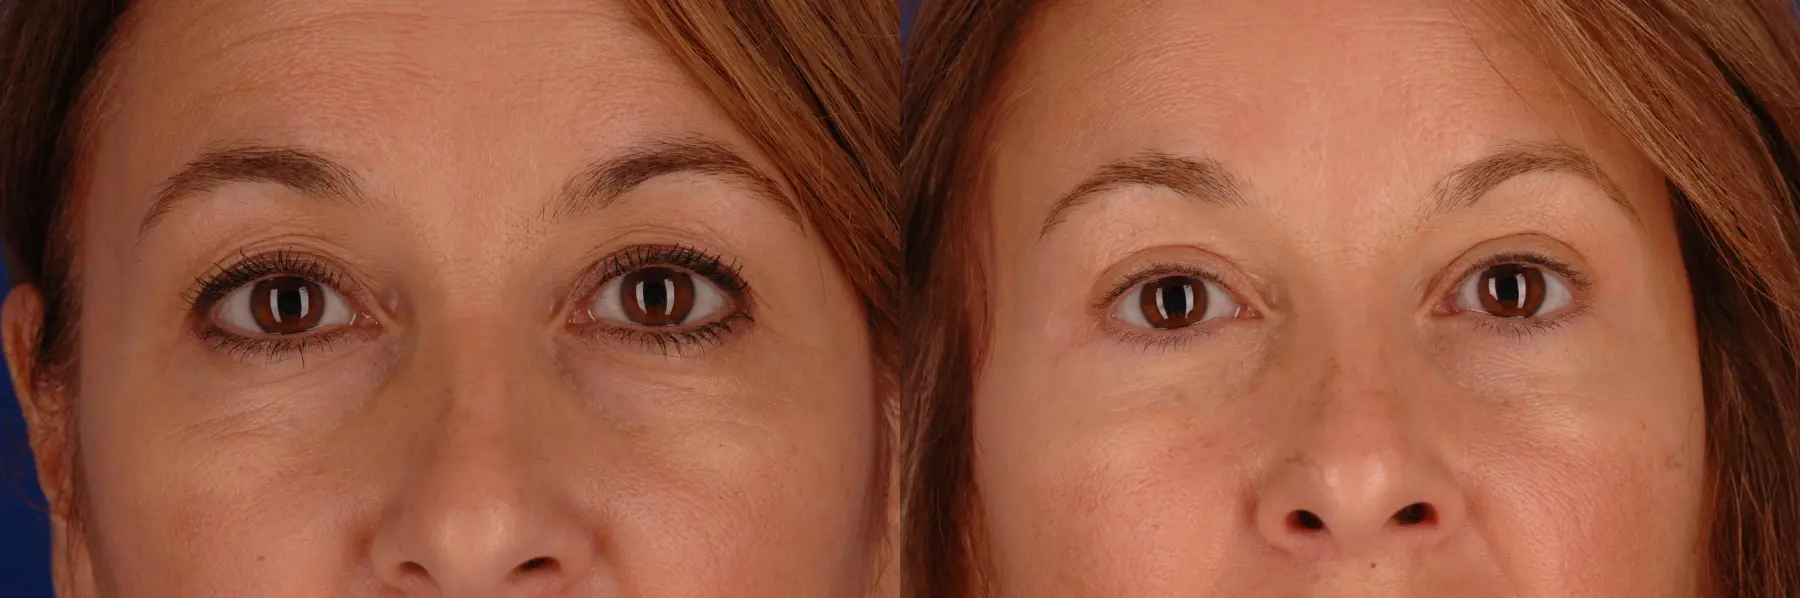 Eyelid Lift Lake Shore Dr, Chicago 2338 - Before and After 1